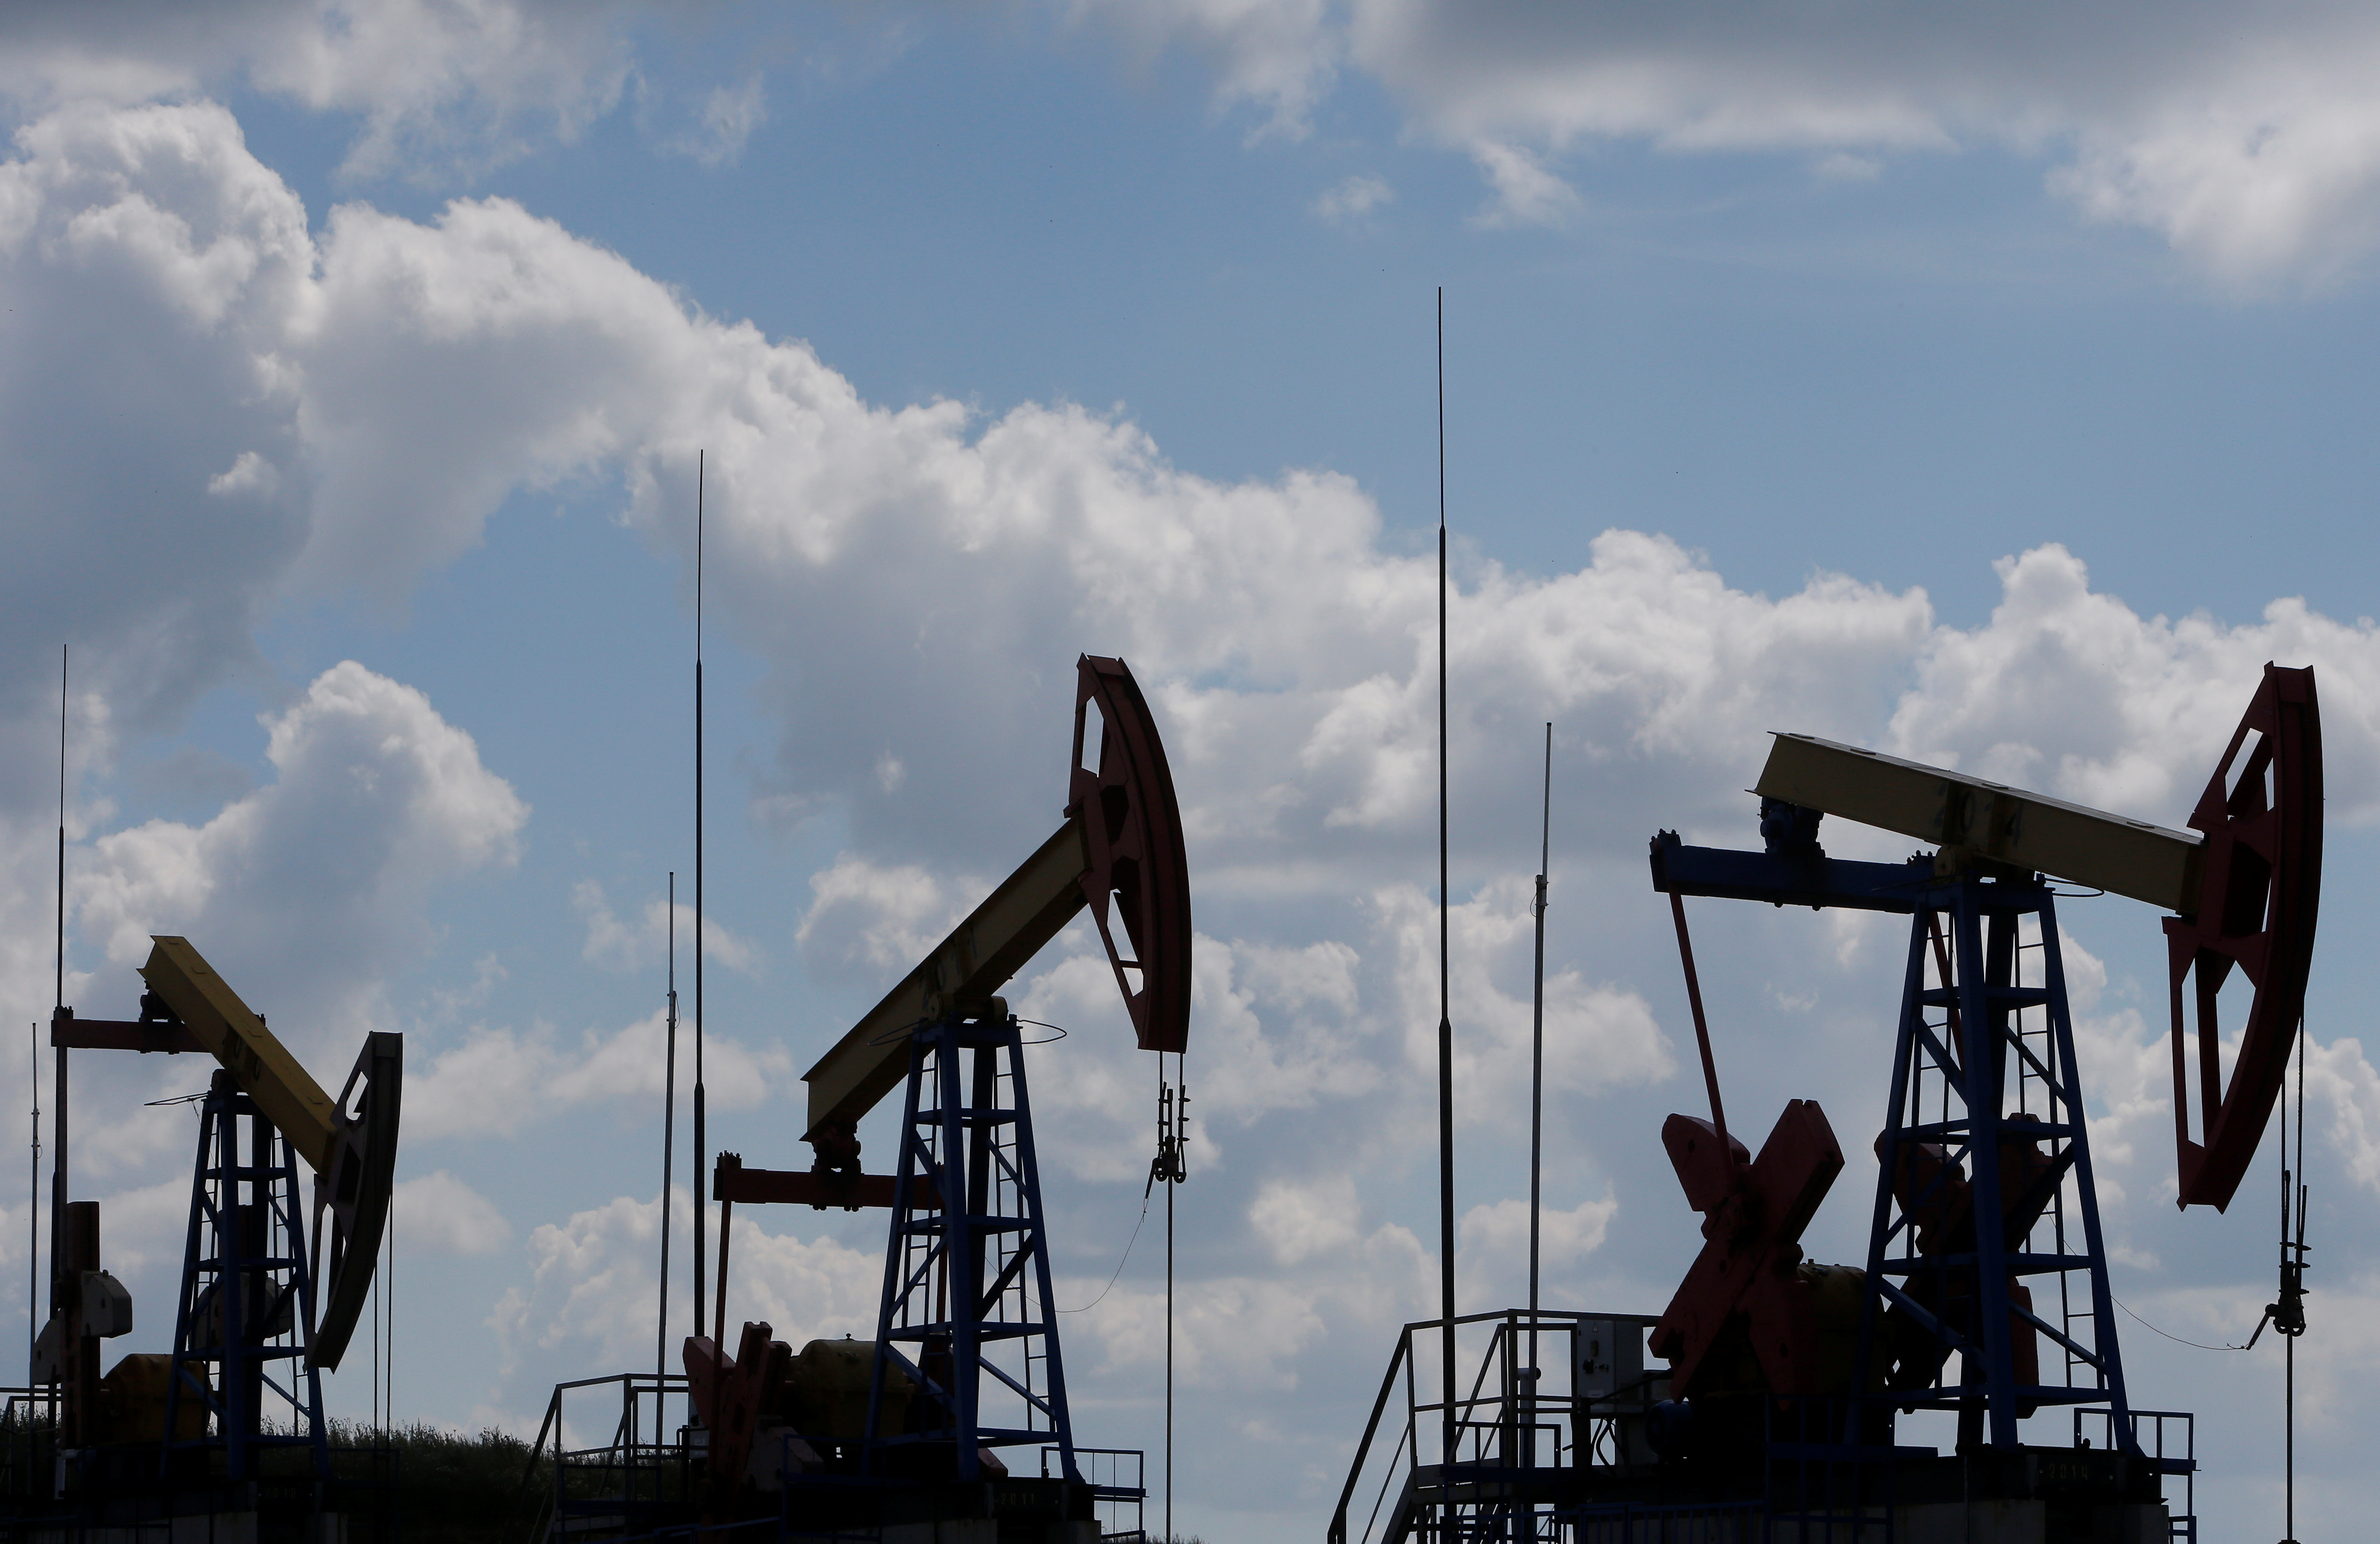 Pump jacks are seen at the Ashalchinskoye oil field owned by Russia's oil producer Tatneft near Almetyevsk